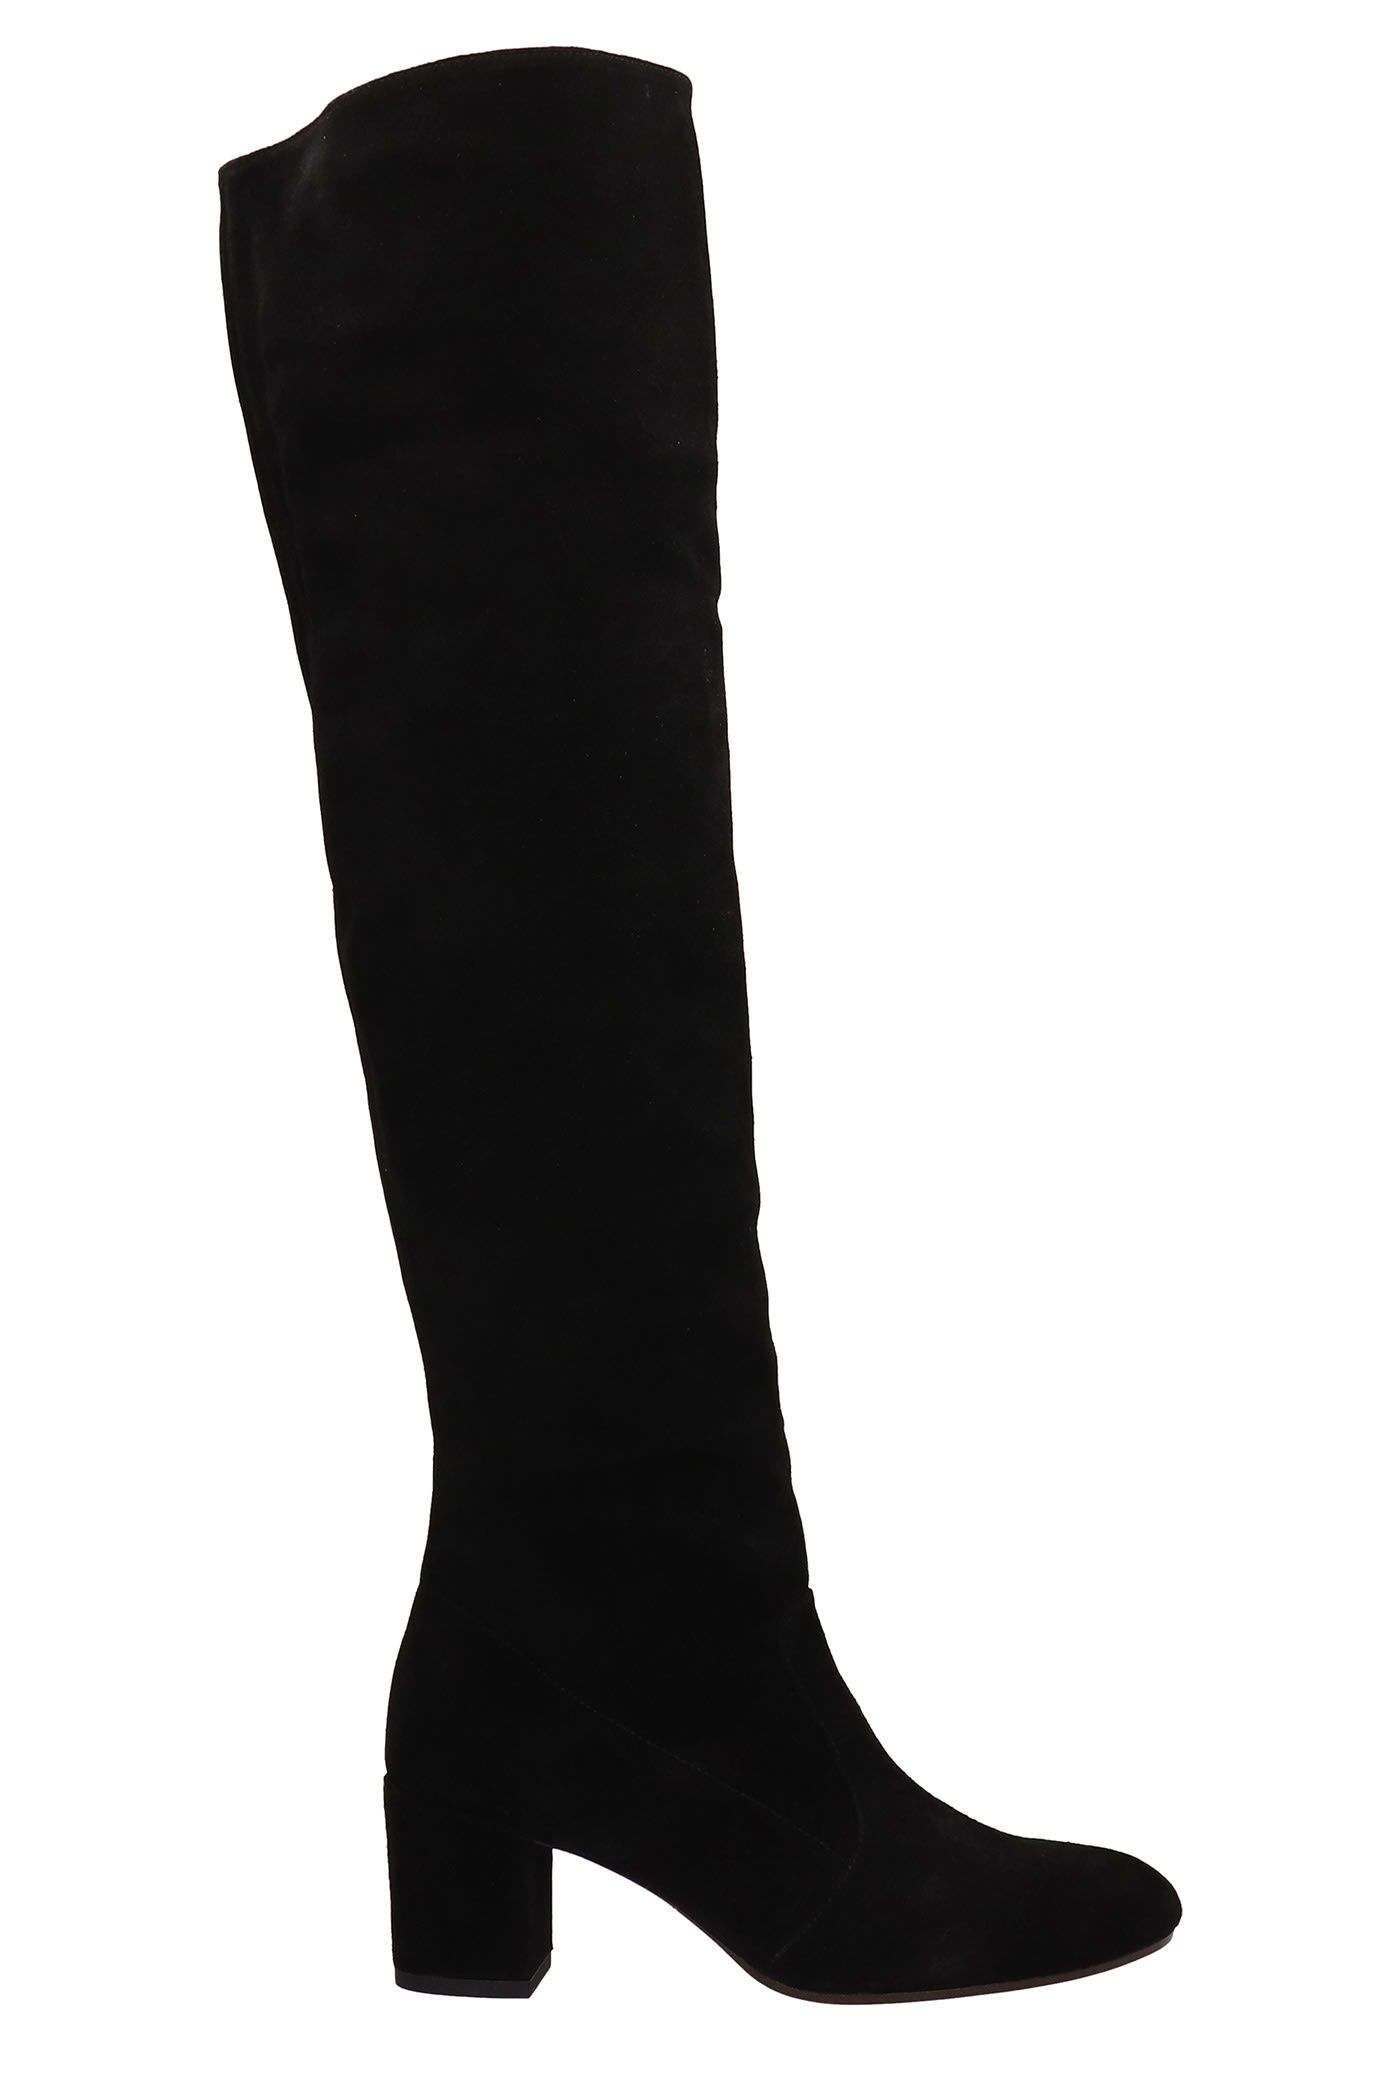 Chie Mihara Nu-nation 39 High Heels Boots In Black Suede